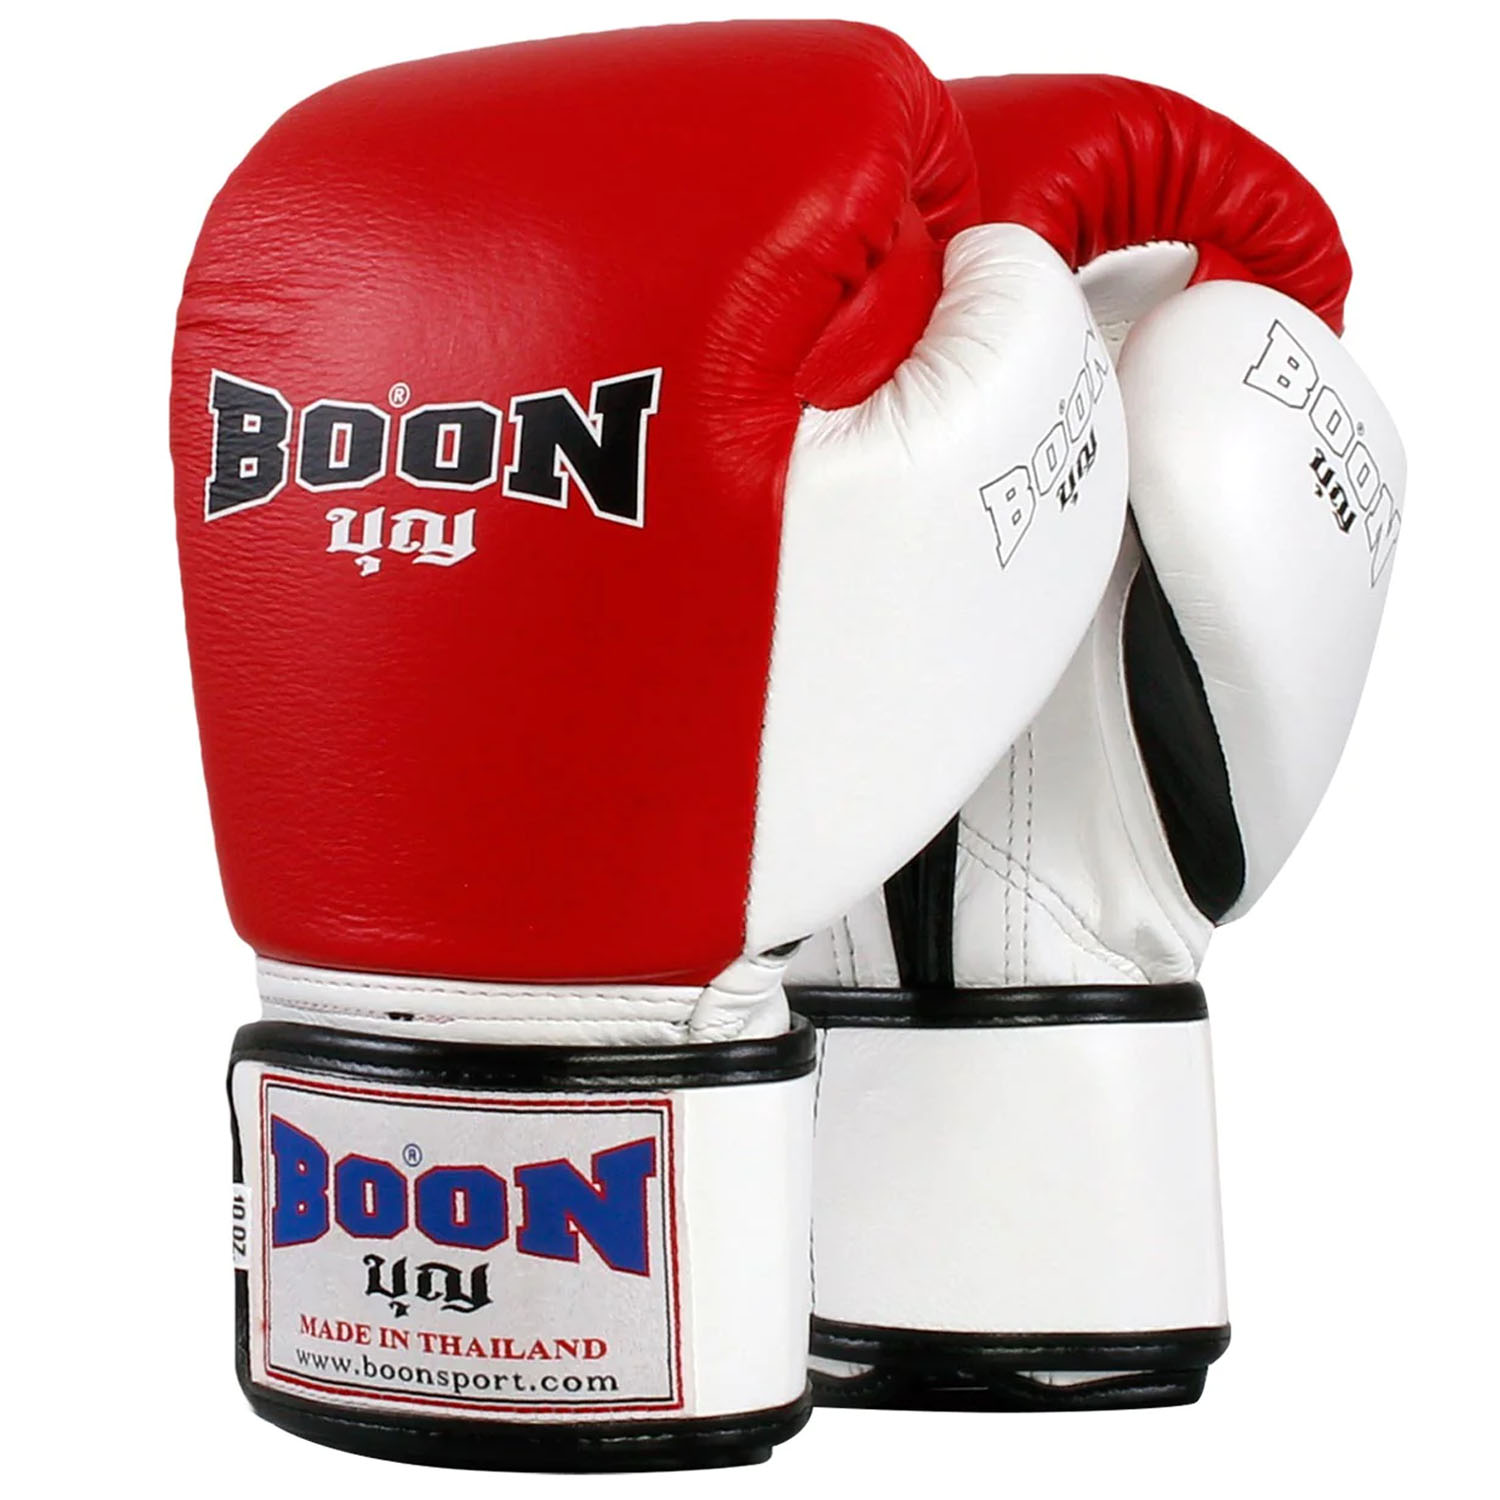 BOON Boxing Gloves, BGCBK, Compact Velcro, red-white, 12 Oz